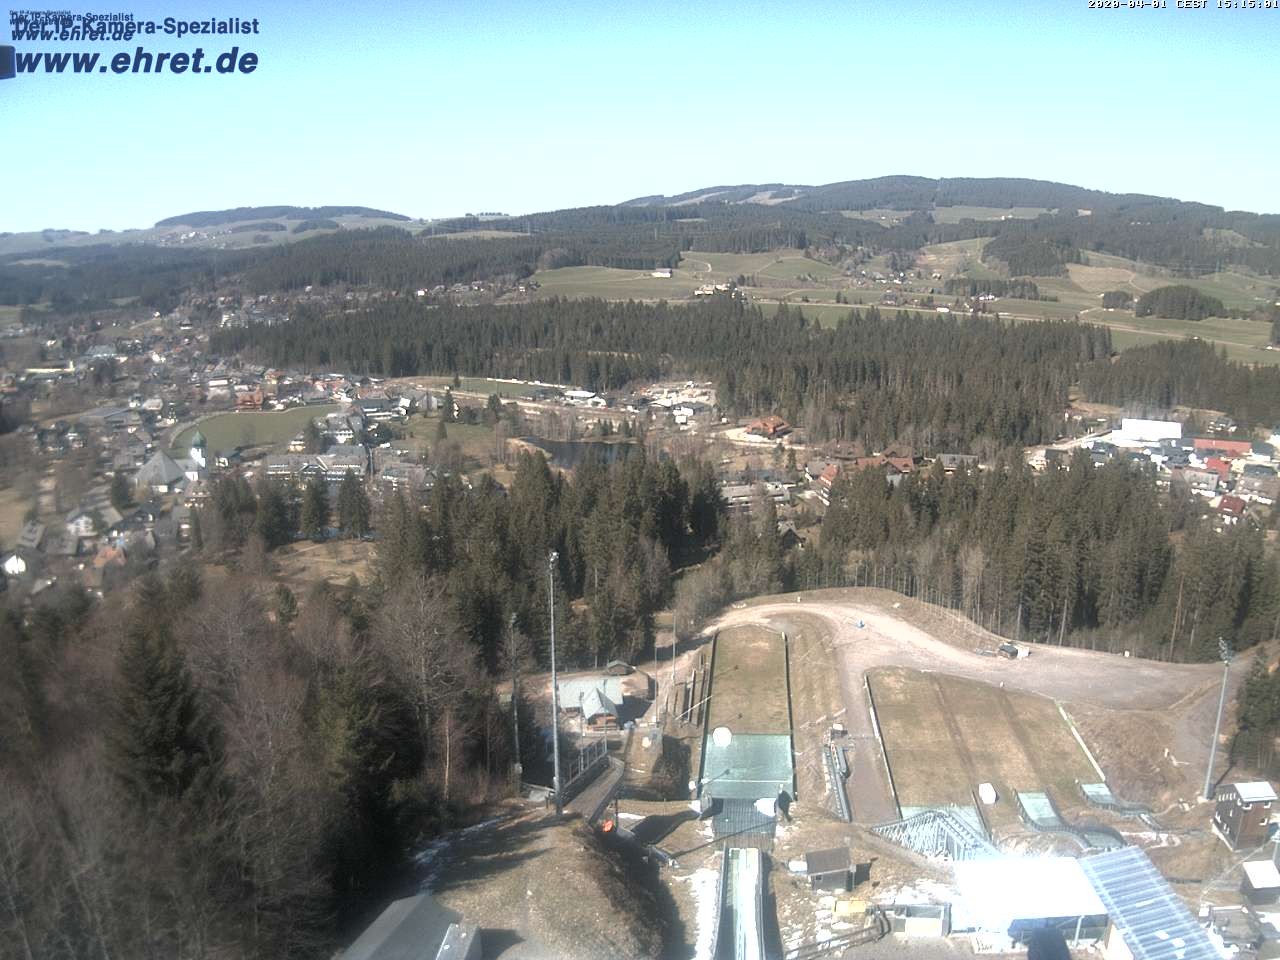 Webcam Adlerjump In Hinterzarten 924 M Black Forest Livecam regarding Amazing in addition to Beautiful ski jumping hinterzarten live stream intended for Your own home